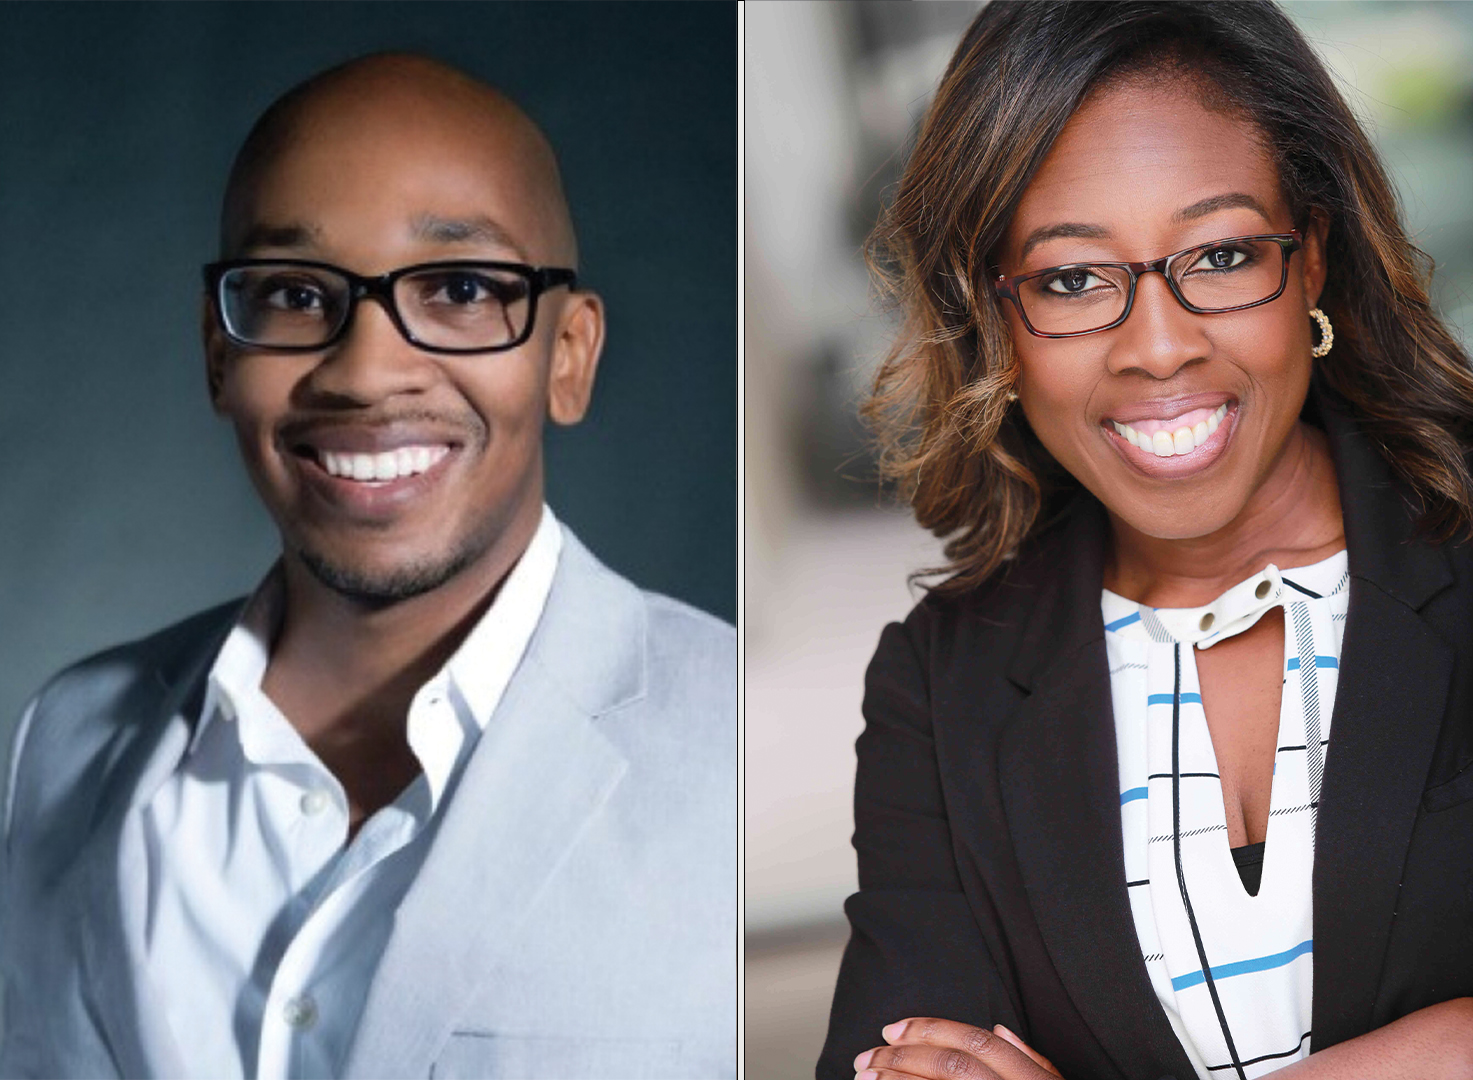 Terrance Mayes, EdD, of the Stanford Cancer Institute as Chair of the NCCN DEI Directors Forum; Loretta Erhunmwunsee, MD, FACS, of City of Hope National Medical Center has been named Vice-Chair